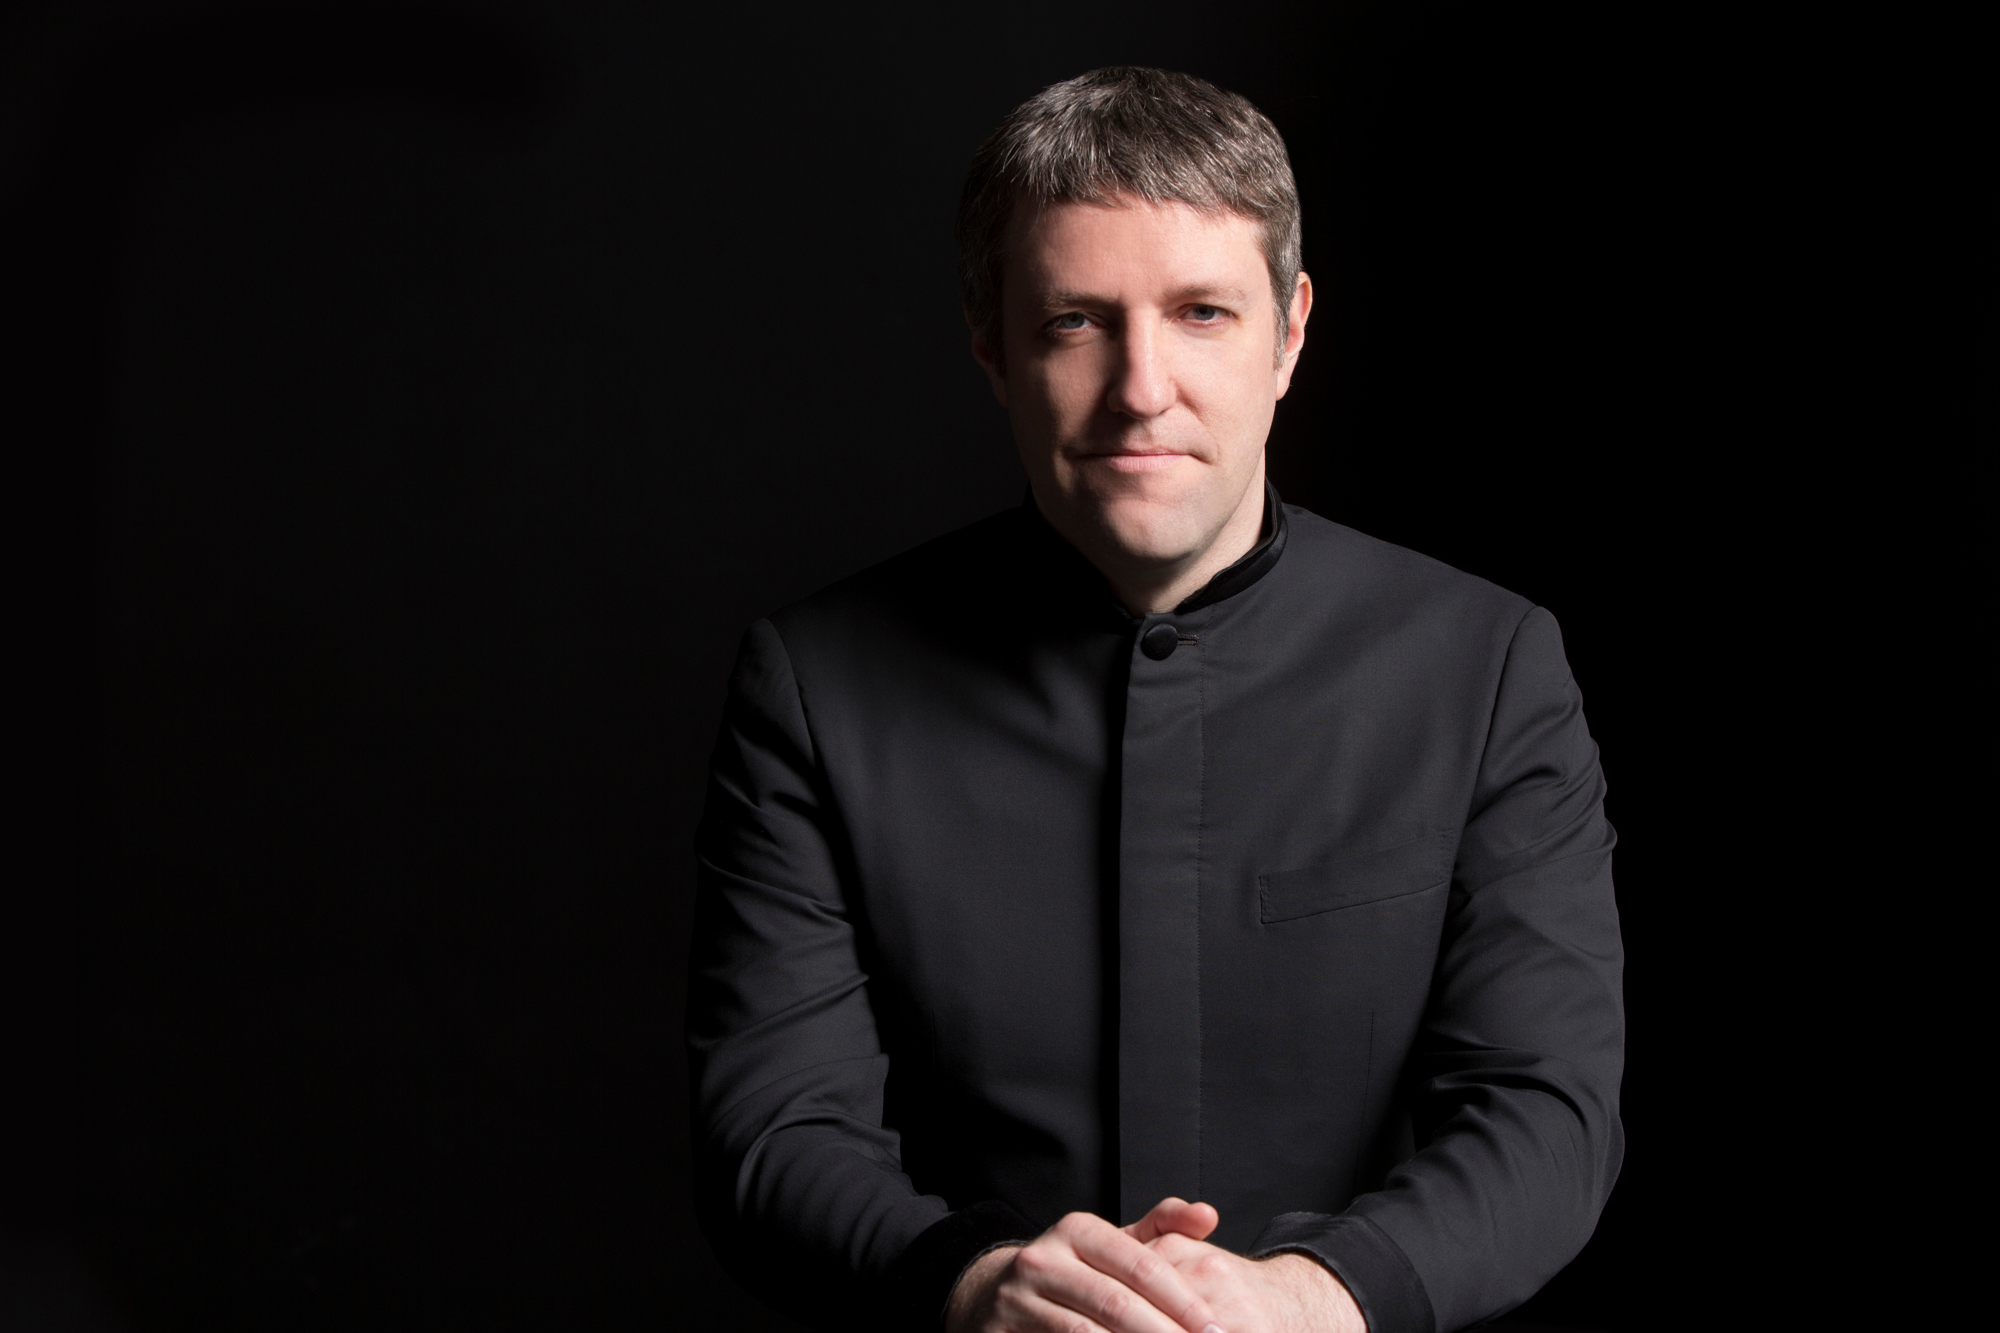 Israeli conductor Yaniv Dinur has performed all over the world, and he'll be in Sarasota helming the Masterworks performances. (Courtesy photo)